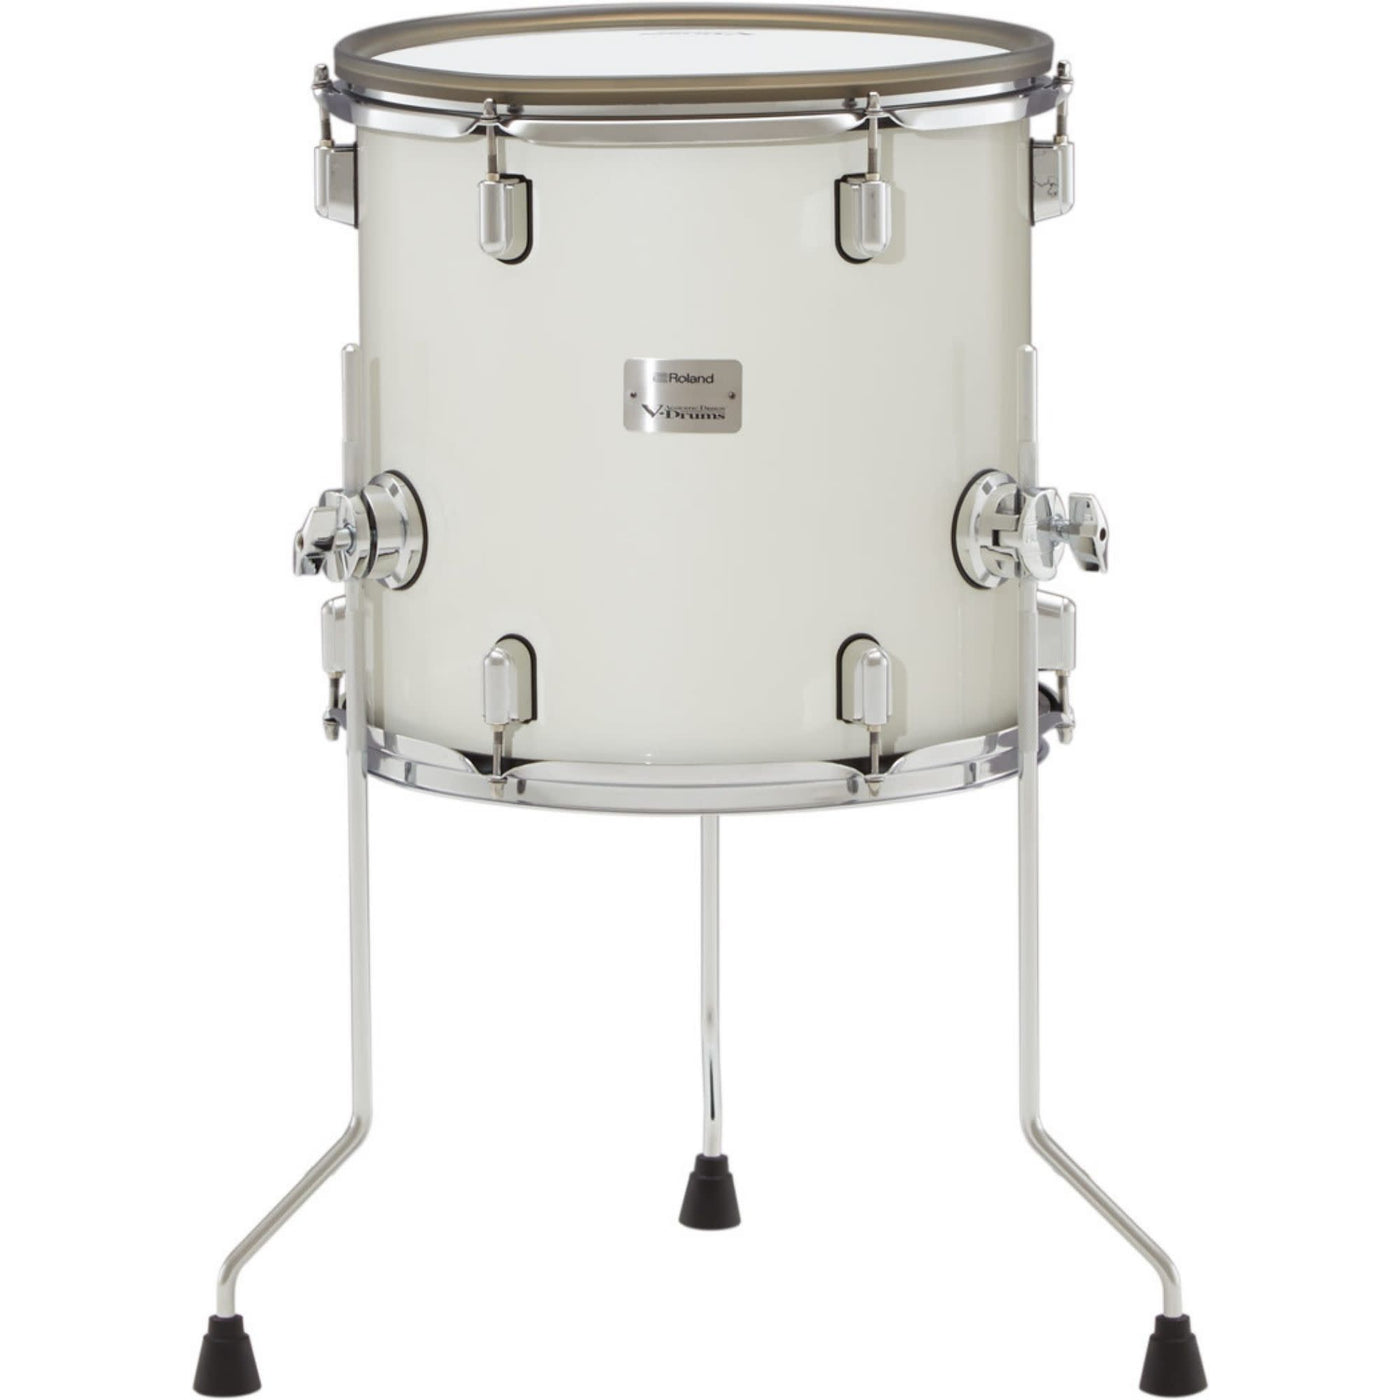 Roland PDA140F-PW 14" V-Drums Acoustic Design Floor Tom Pad, Pearl White